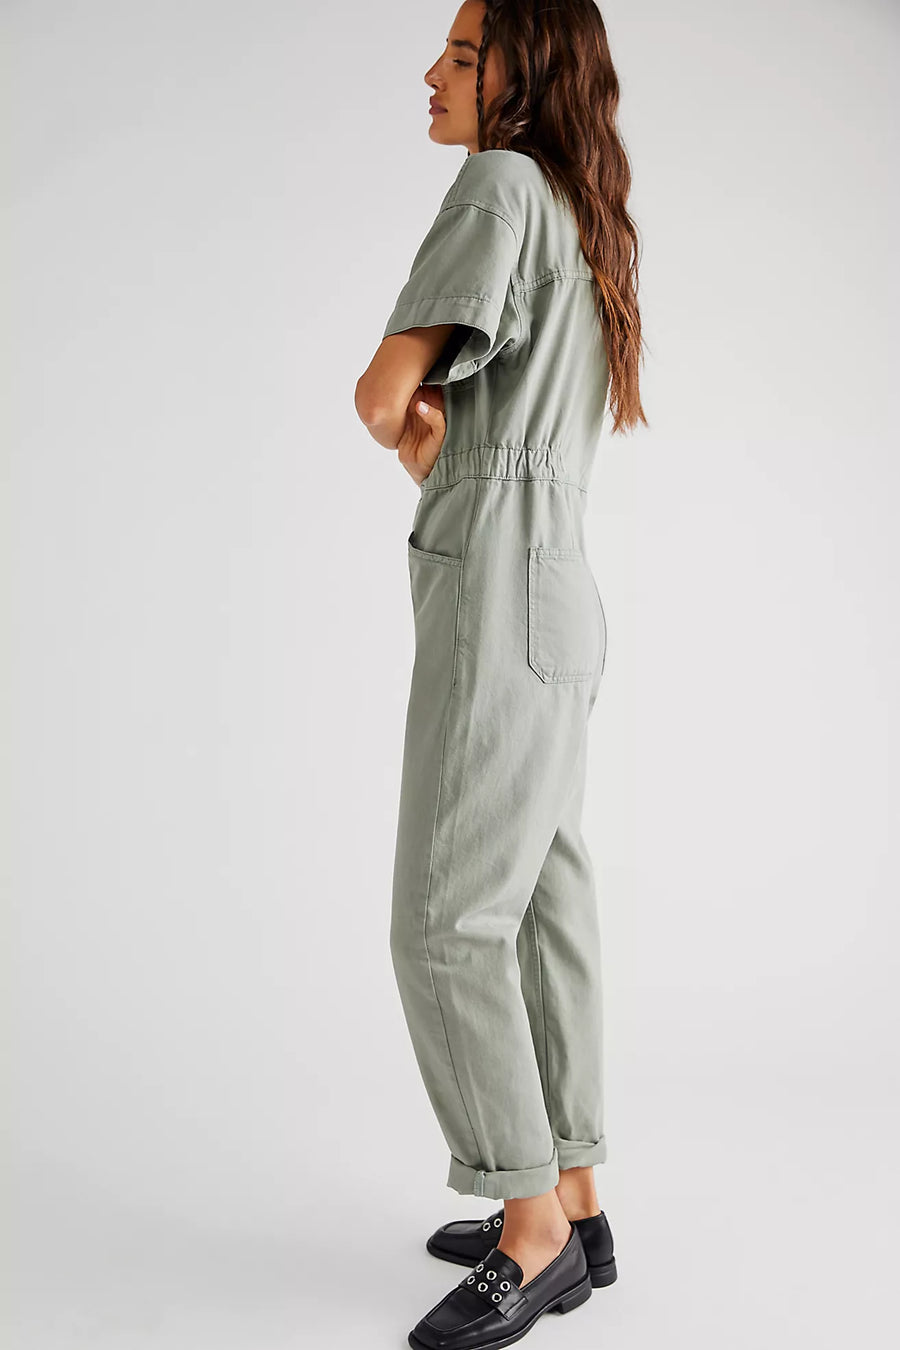 Free People Marci Jumpsuit - Washed Army